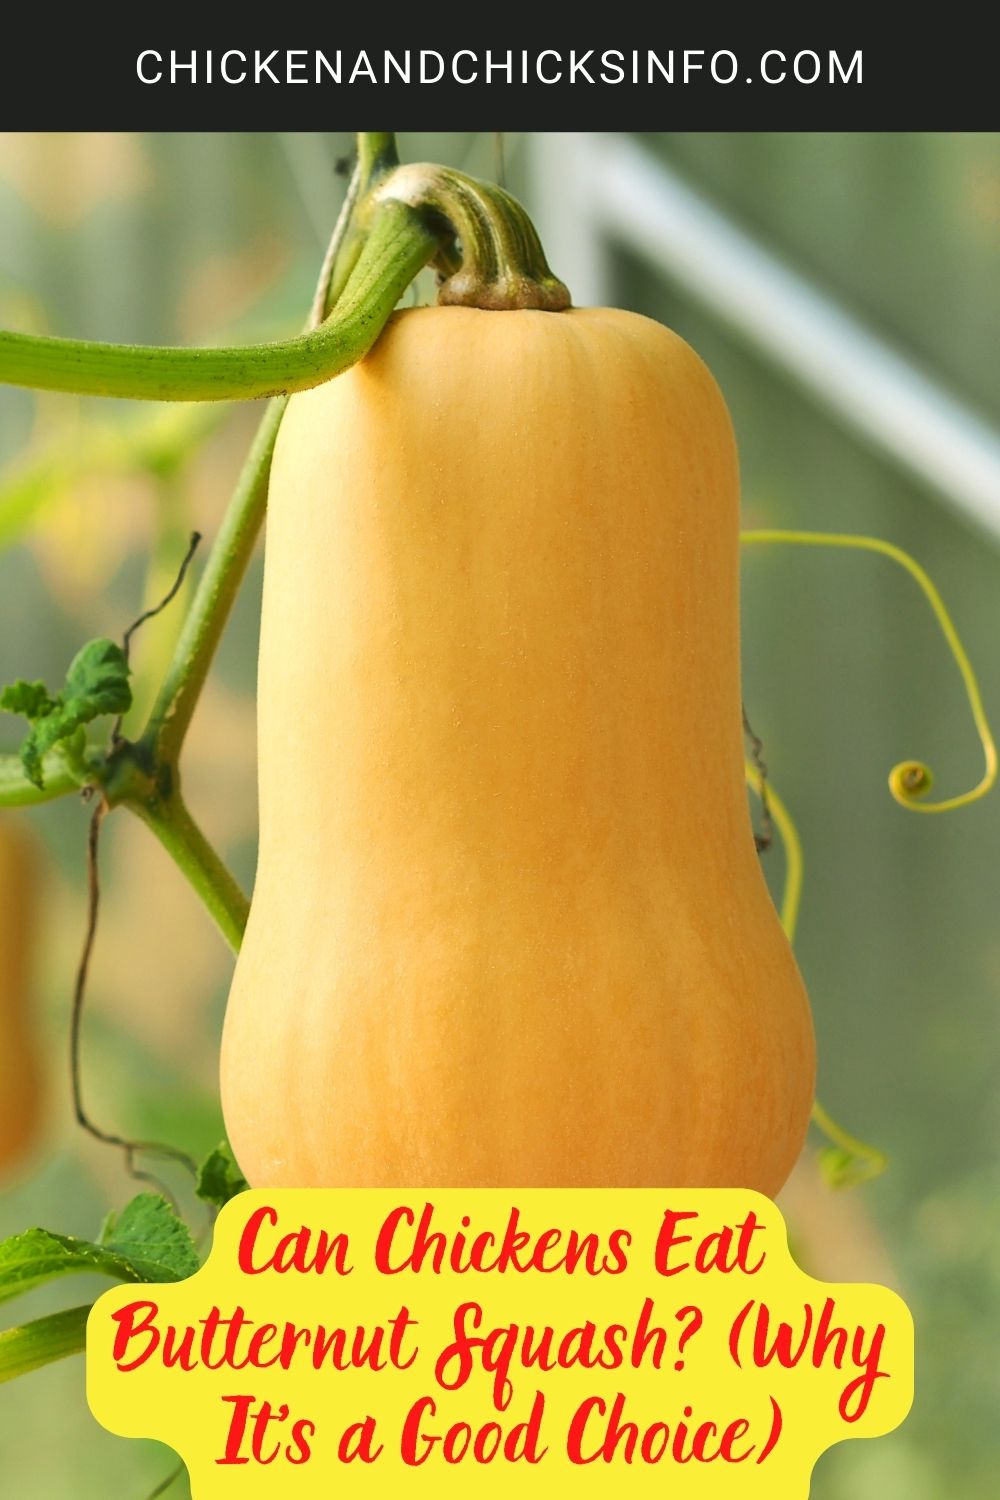 Can Chickens Eat Butternut Squash? (Why It's a Good Choice) poster.
